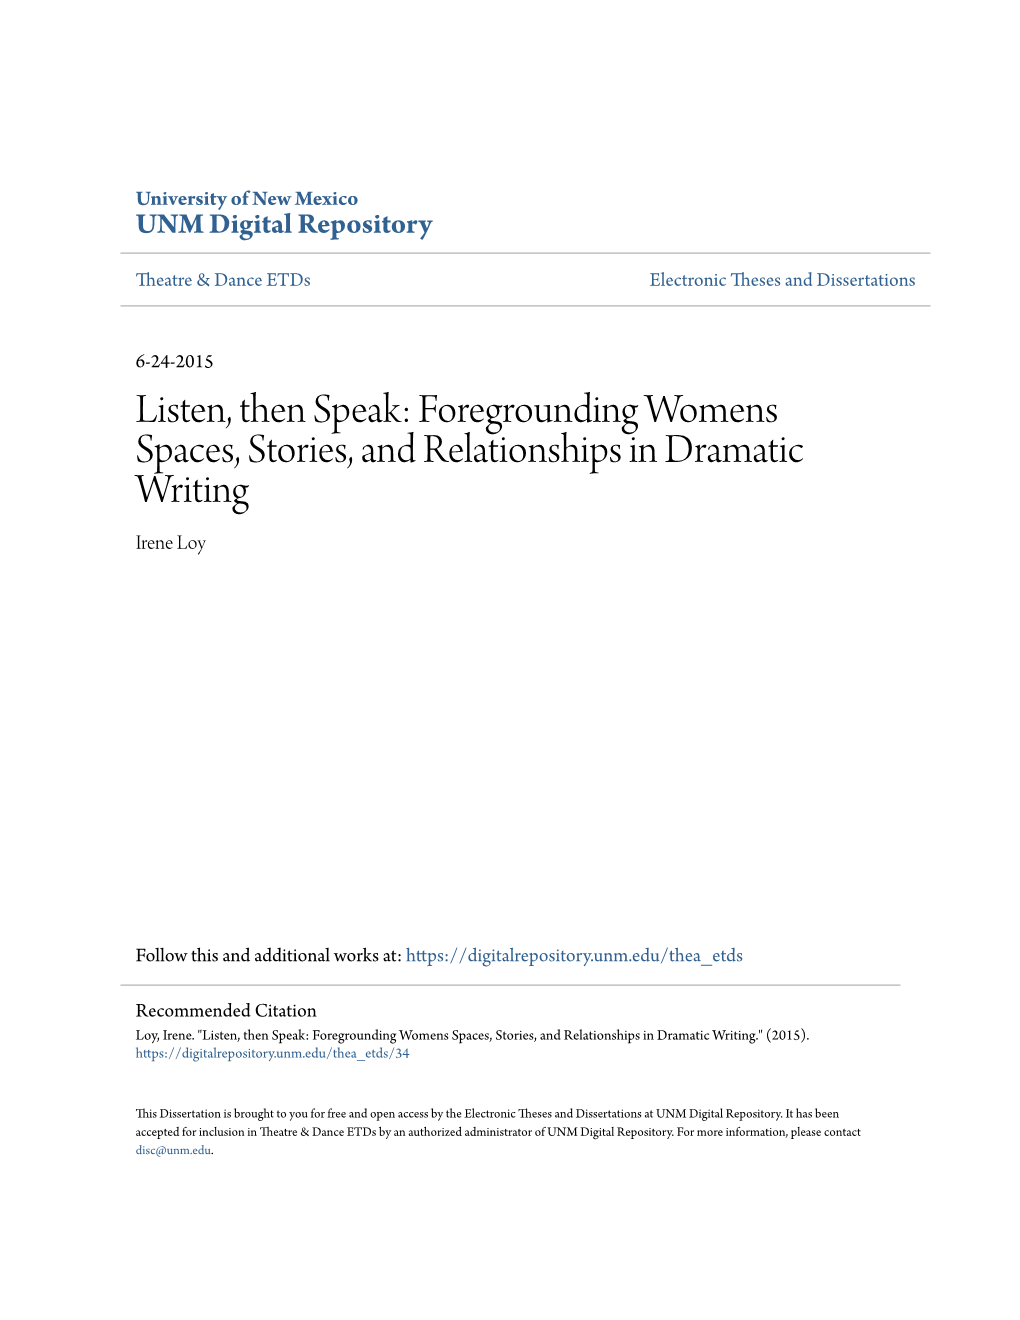 Foregrounding Womens Spaces, Stories, and Relationships in Dramatic Writing Irene Loy